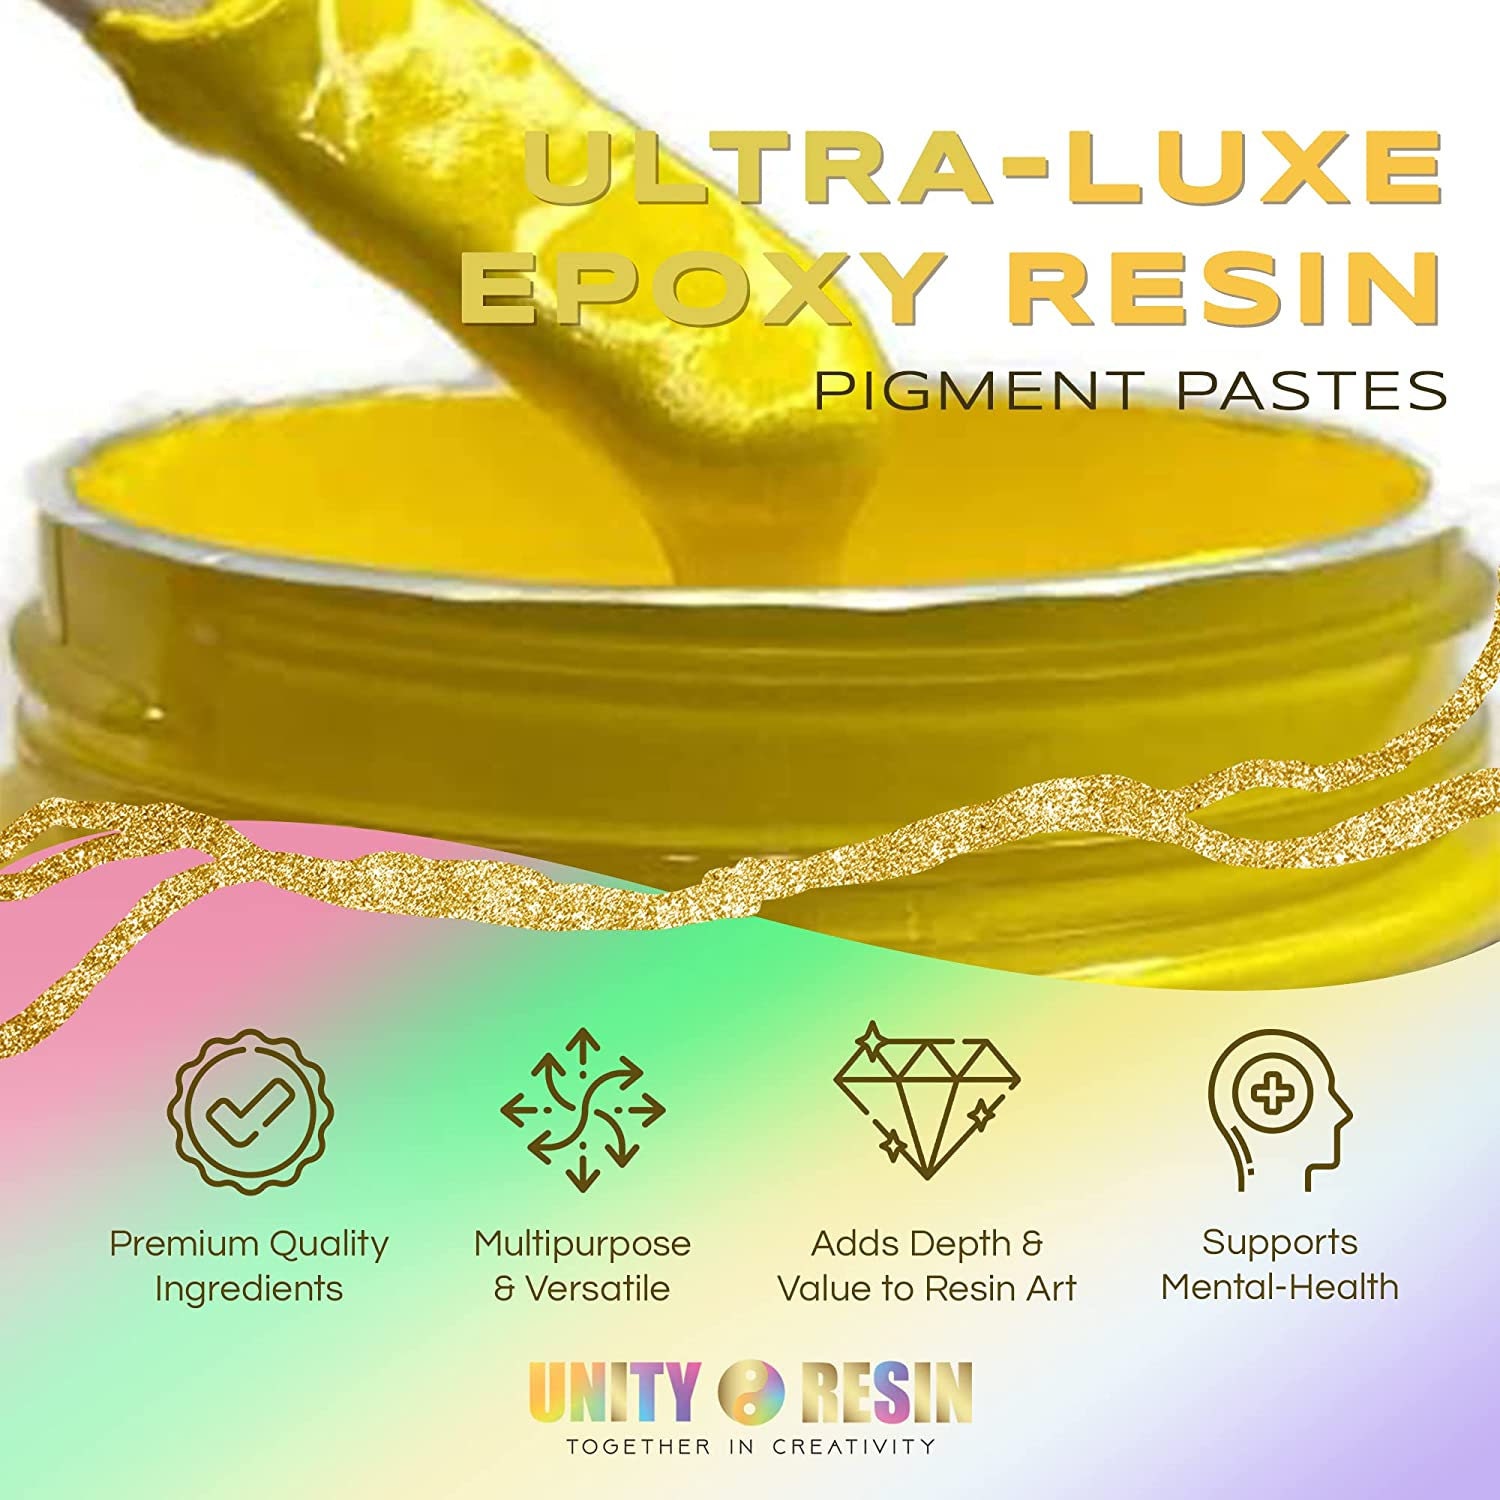 Ultra Luxe' Epoxy Pigment Paste-extreme WHITE, Resin Art, White Mica, Epoxy  Paste, Resin Pigments, Geode Art, Resin Paint, Resin Wave Art 